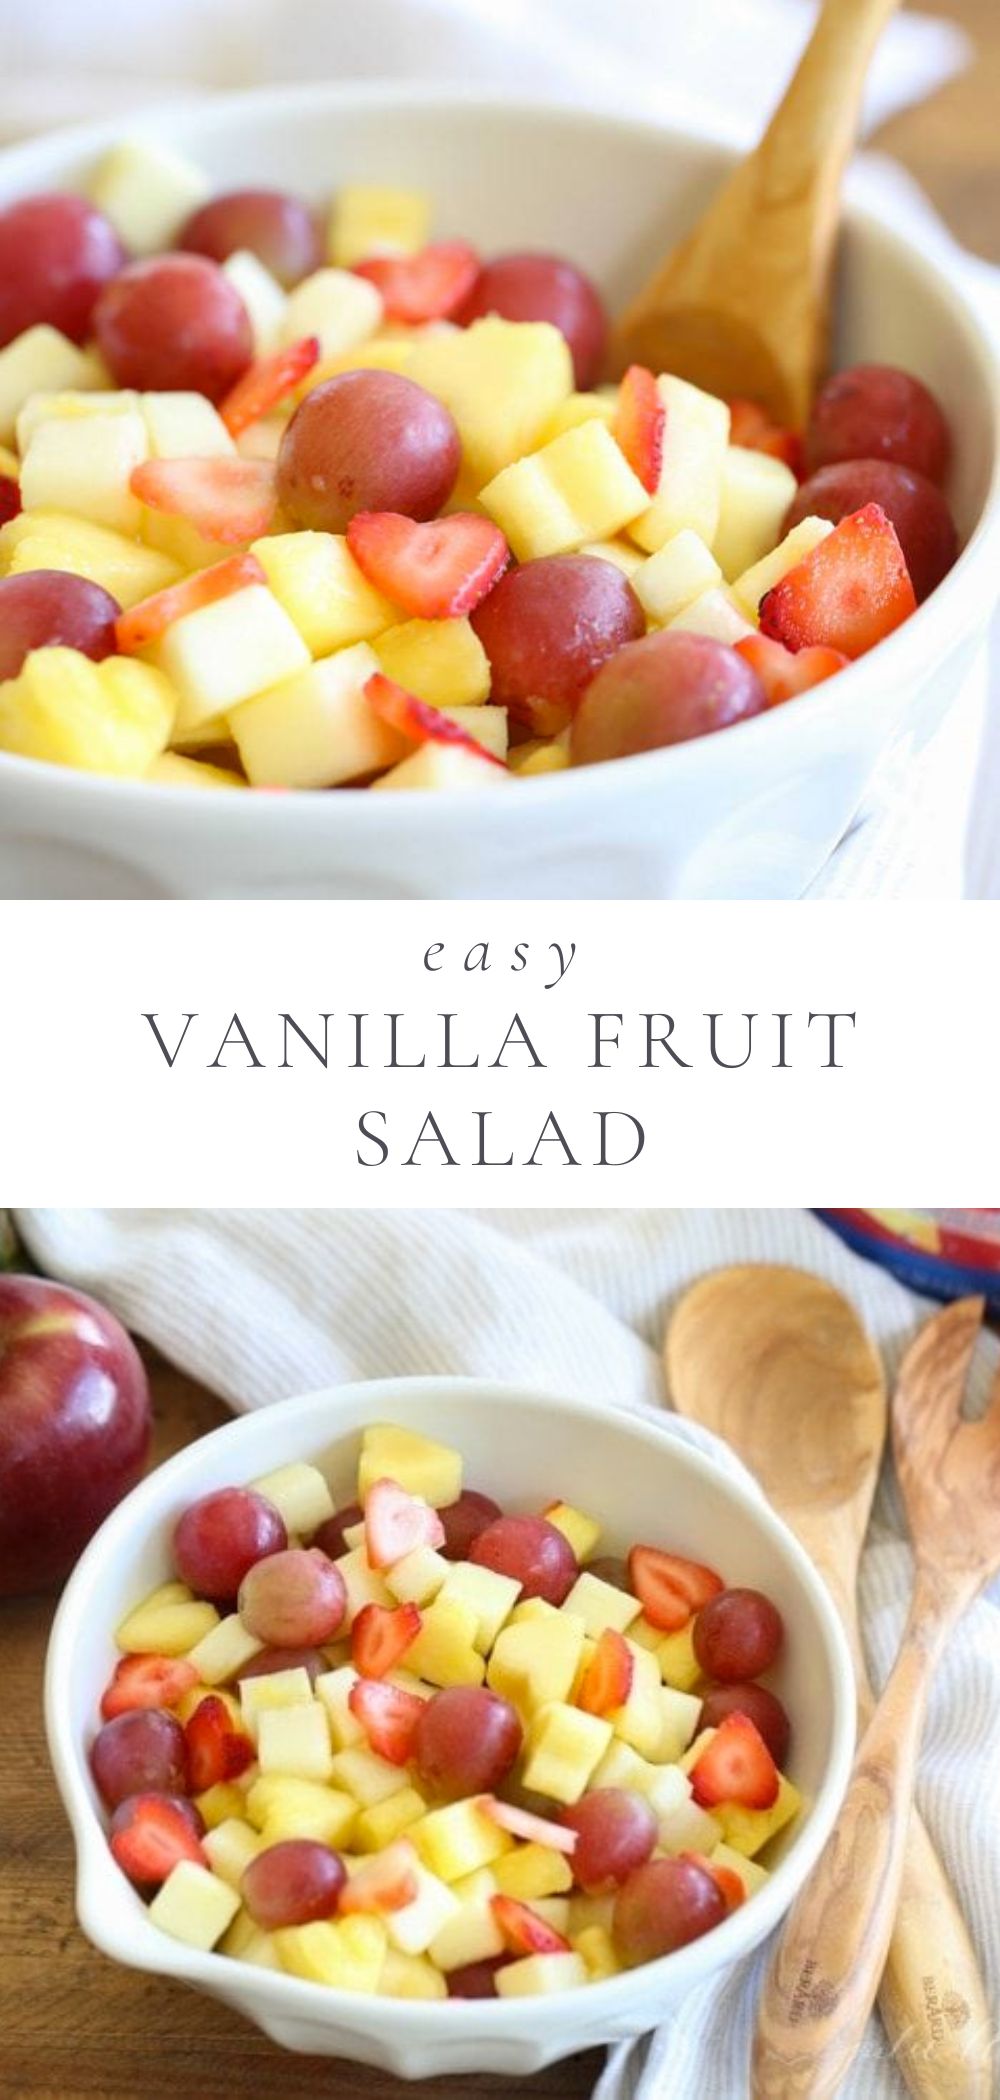 vanilla fruit salad in a bowl with a wooden spoon